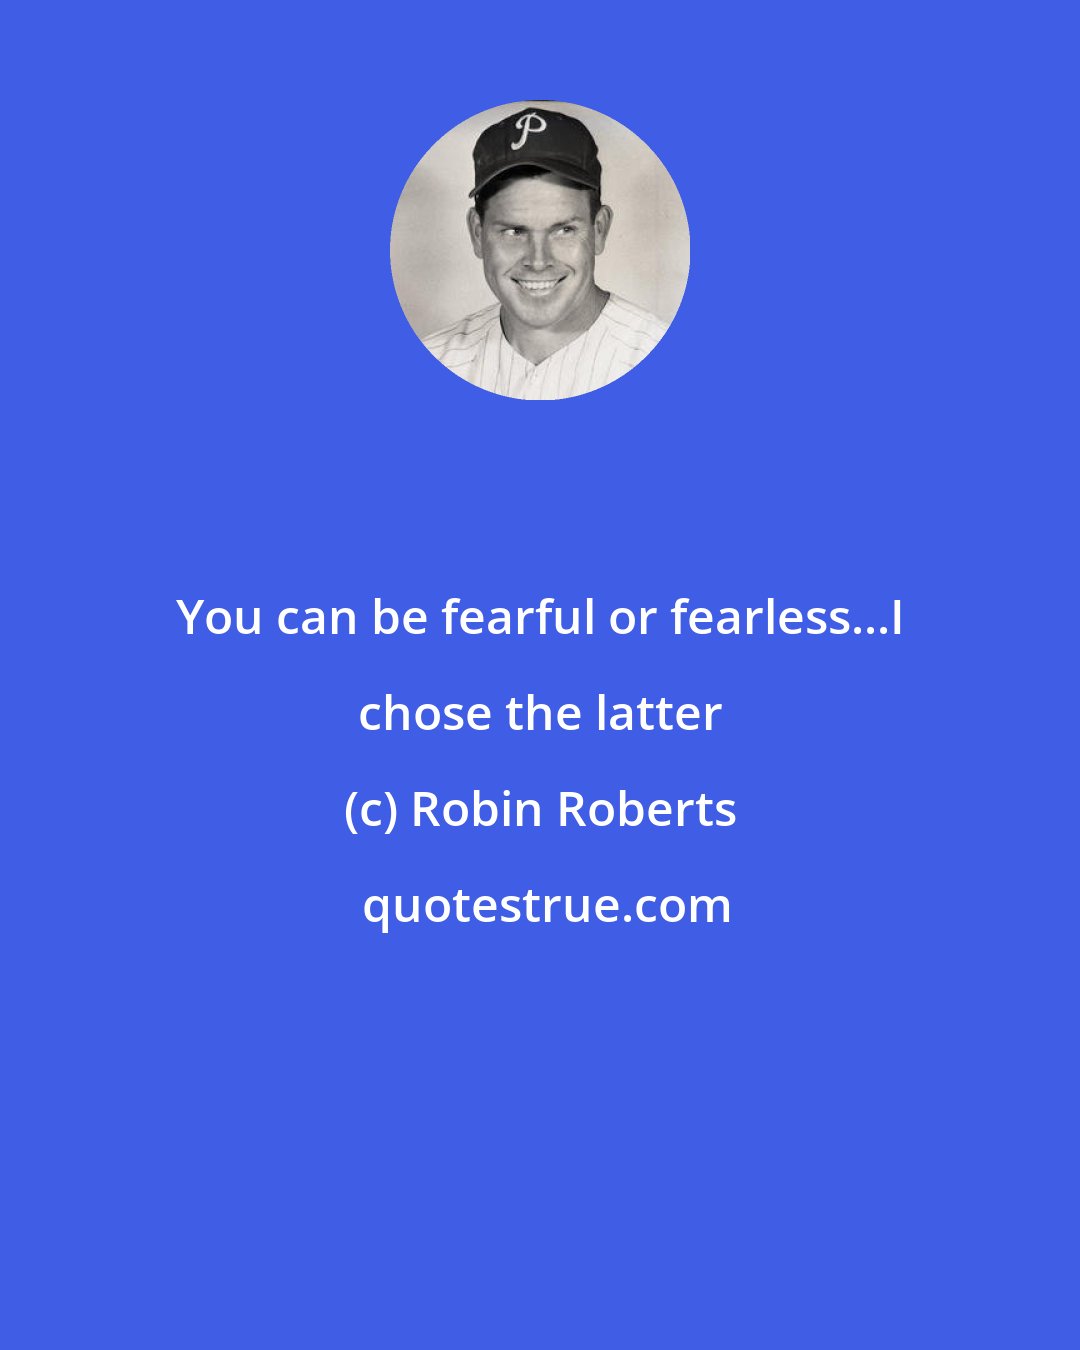 Robin Roberts: You can be fearful or fearless...I chose the latter